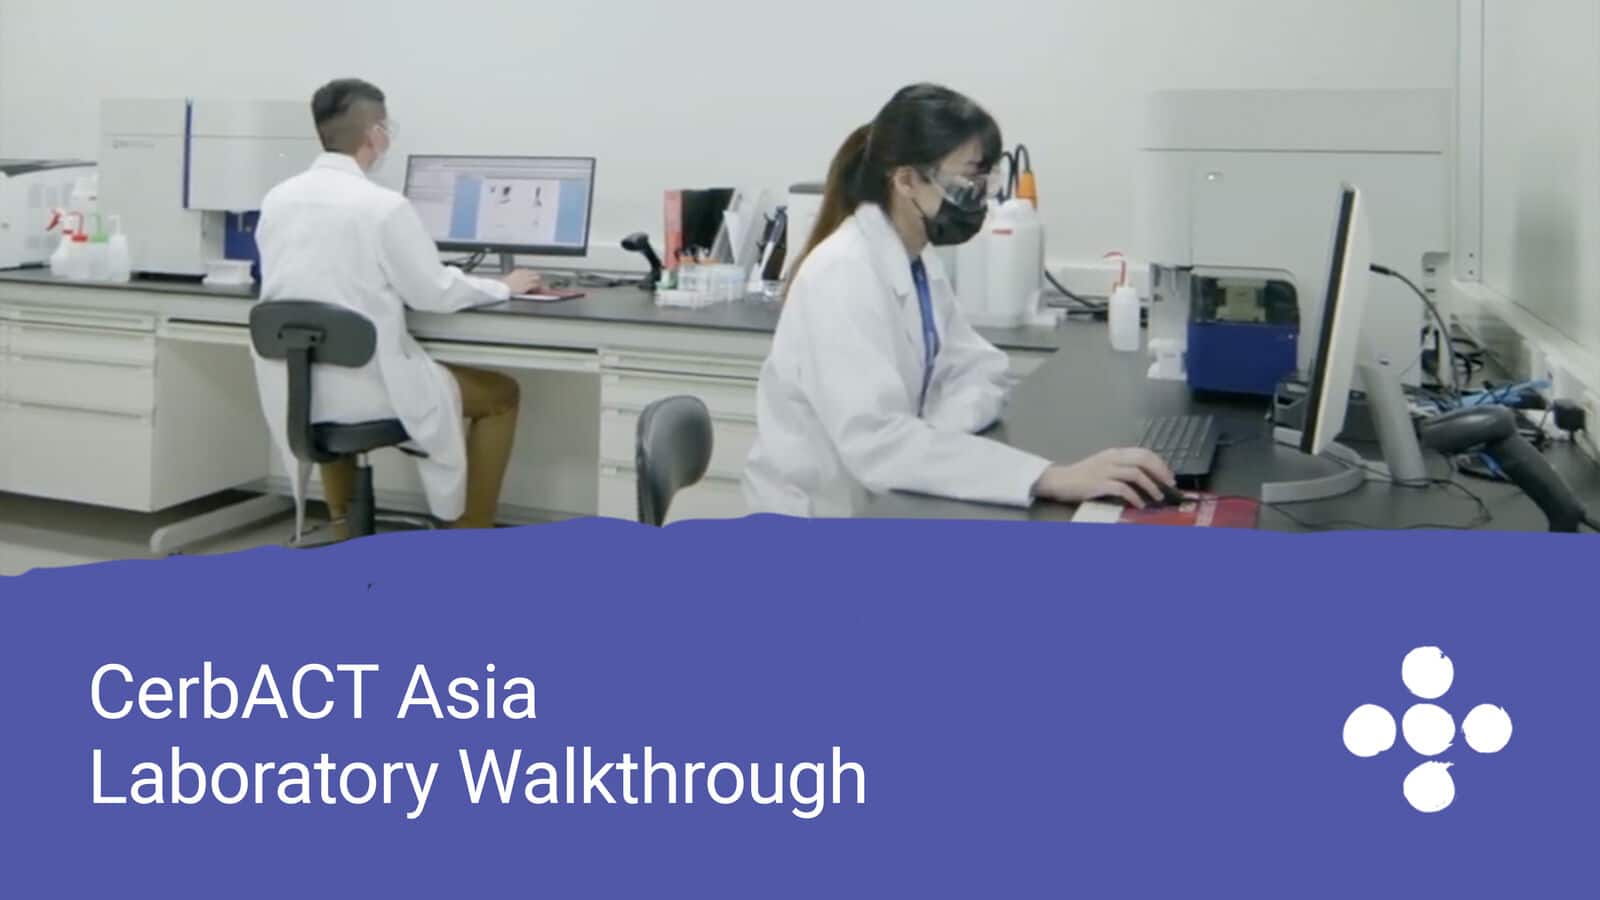 Cerba Research takes you on a 360 degree tour of their research lab in Taipei, Taiwan